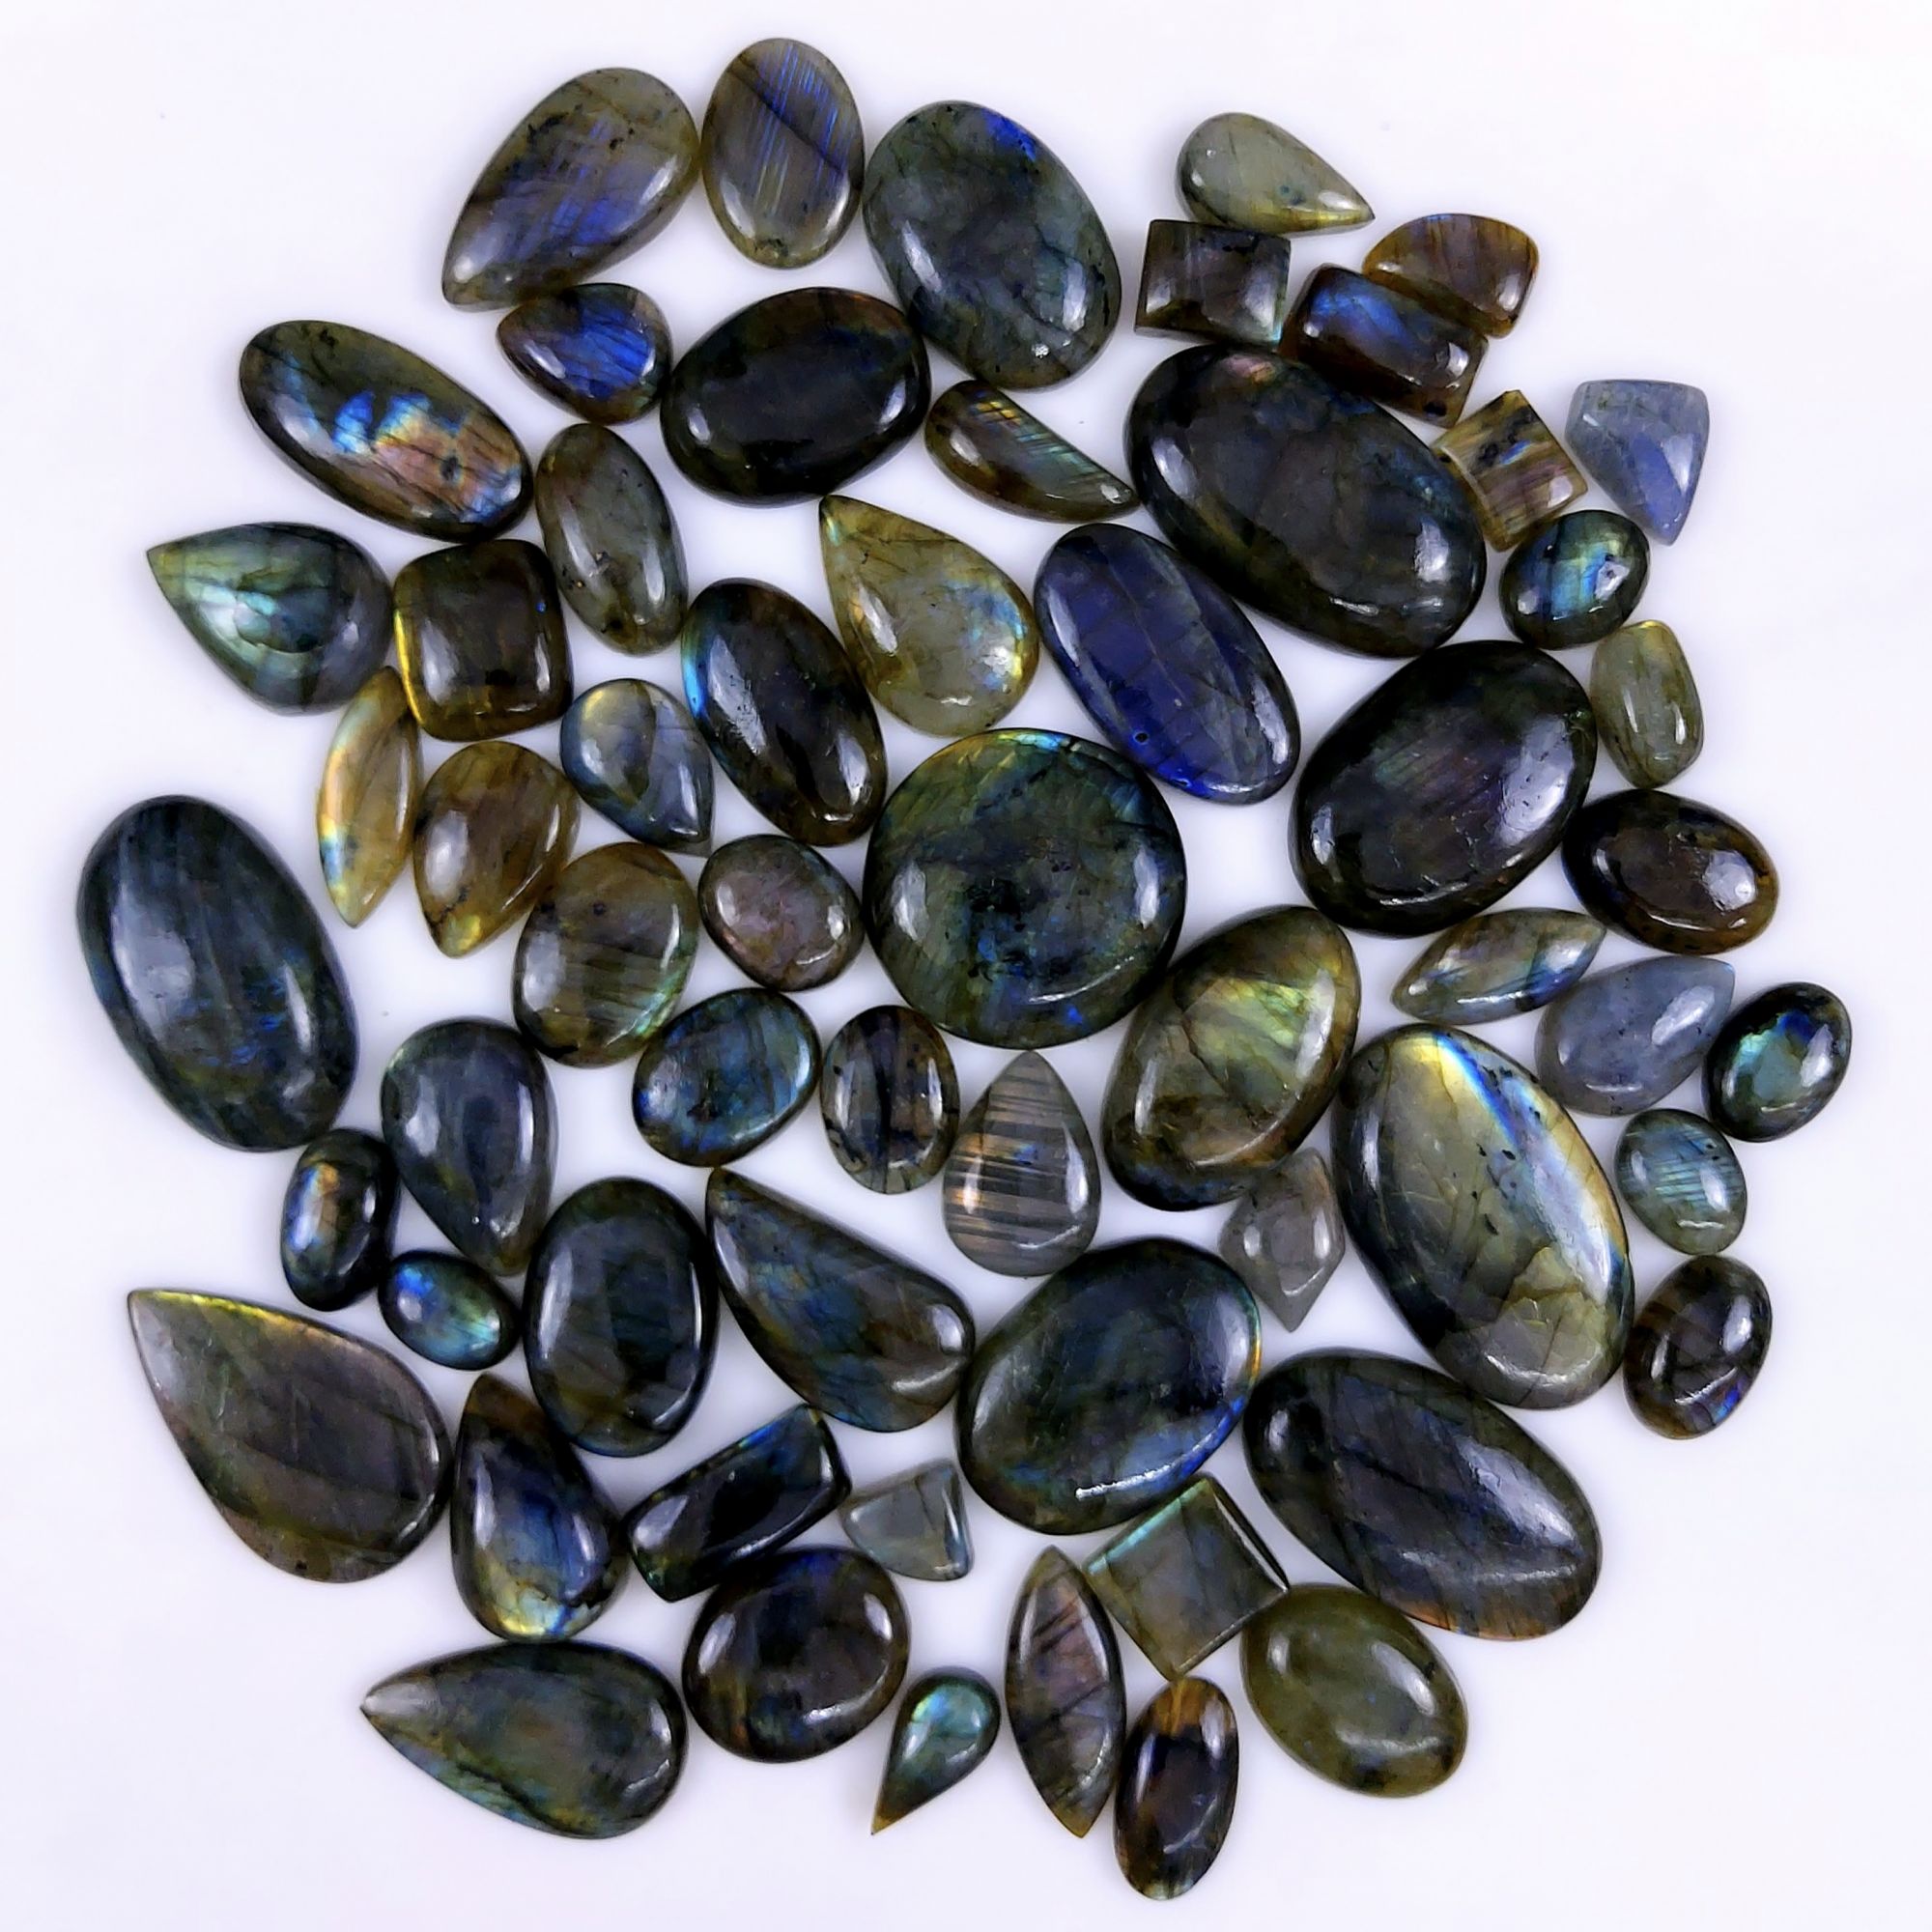 60pc 1744Cts Labradorite Cabochon Multifire Healing Crystal For Jewelry Supplies, Labradorite Necklace Handmade Wire Wrapped Gemstone Pendant 45x28 16x10mm#6265